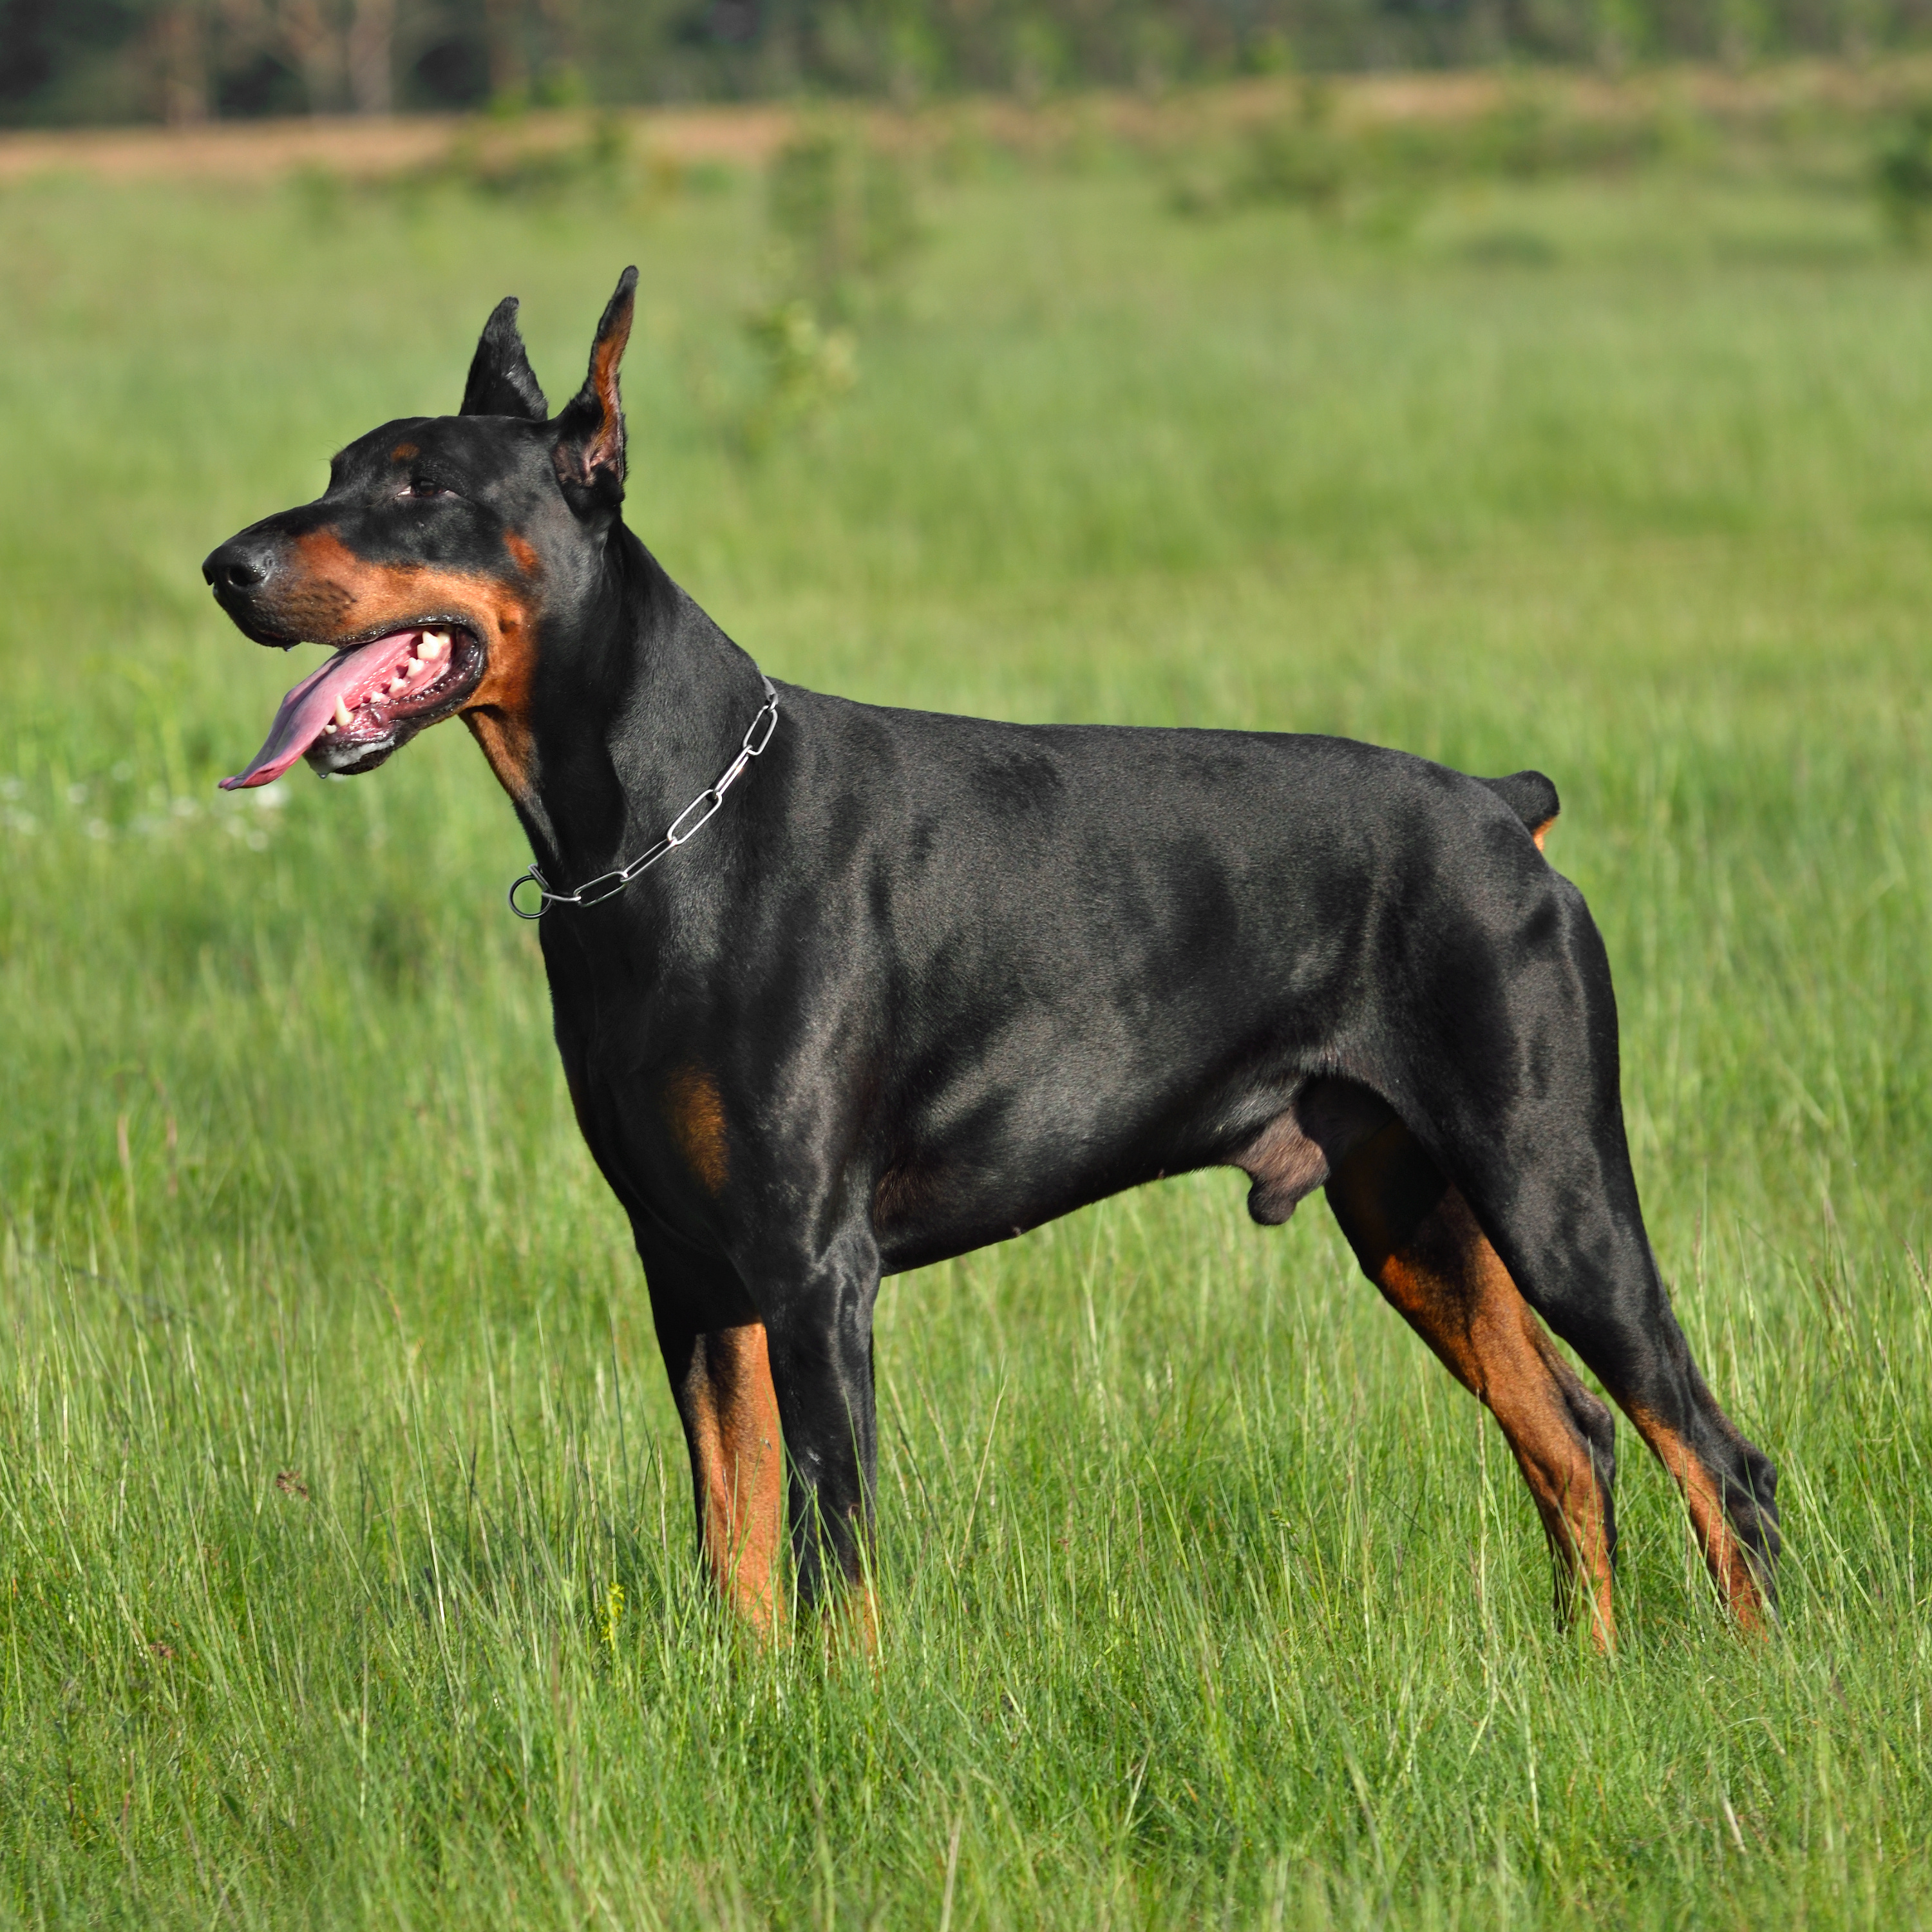 Dog Training Elite has expert Doberman training in Lowell, MA
																															 that are experienced in a variety of positive training methods for Dobermans.